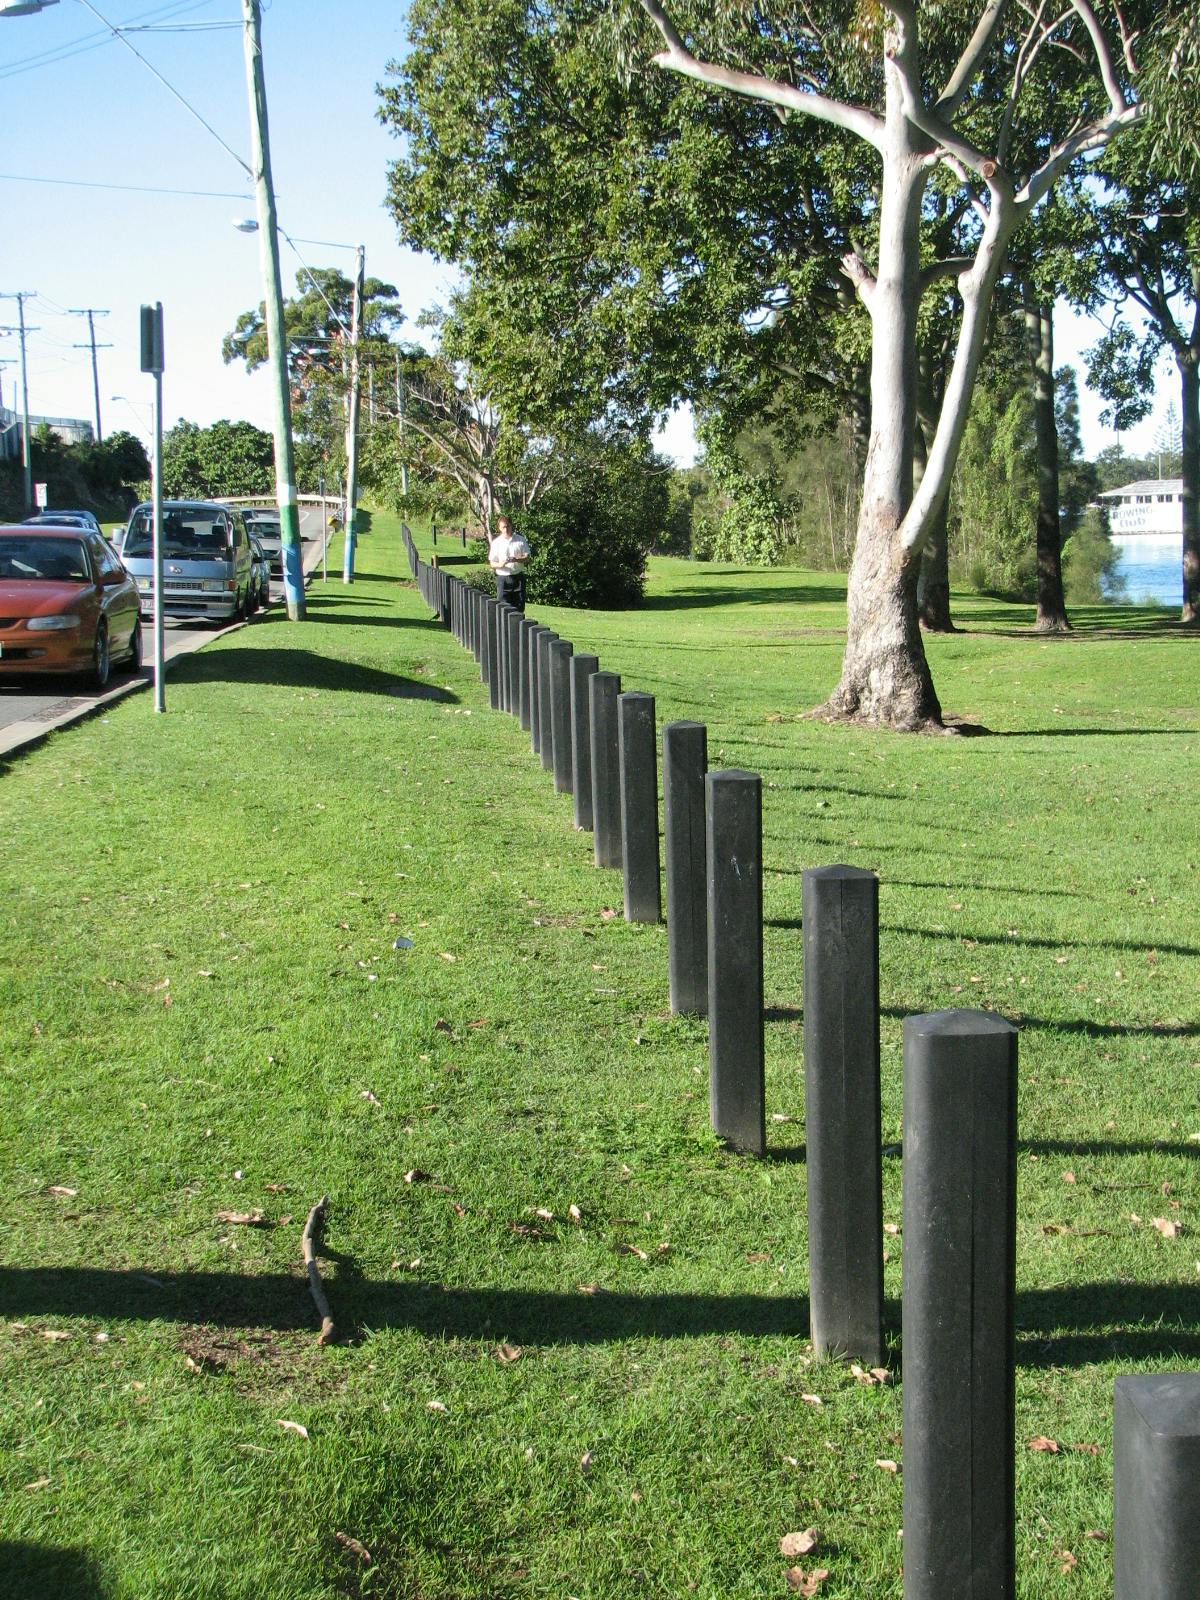 Recycled plastic bollards used in parks and open spaces